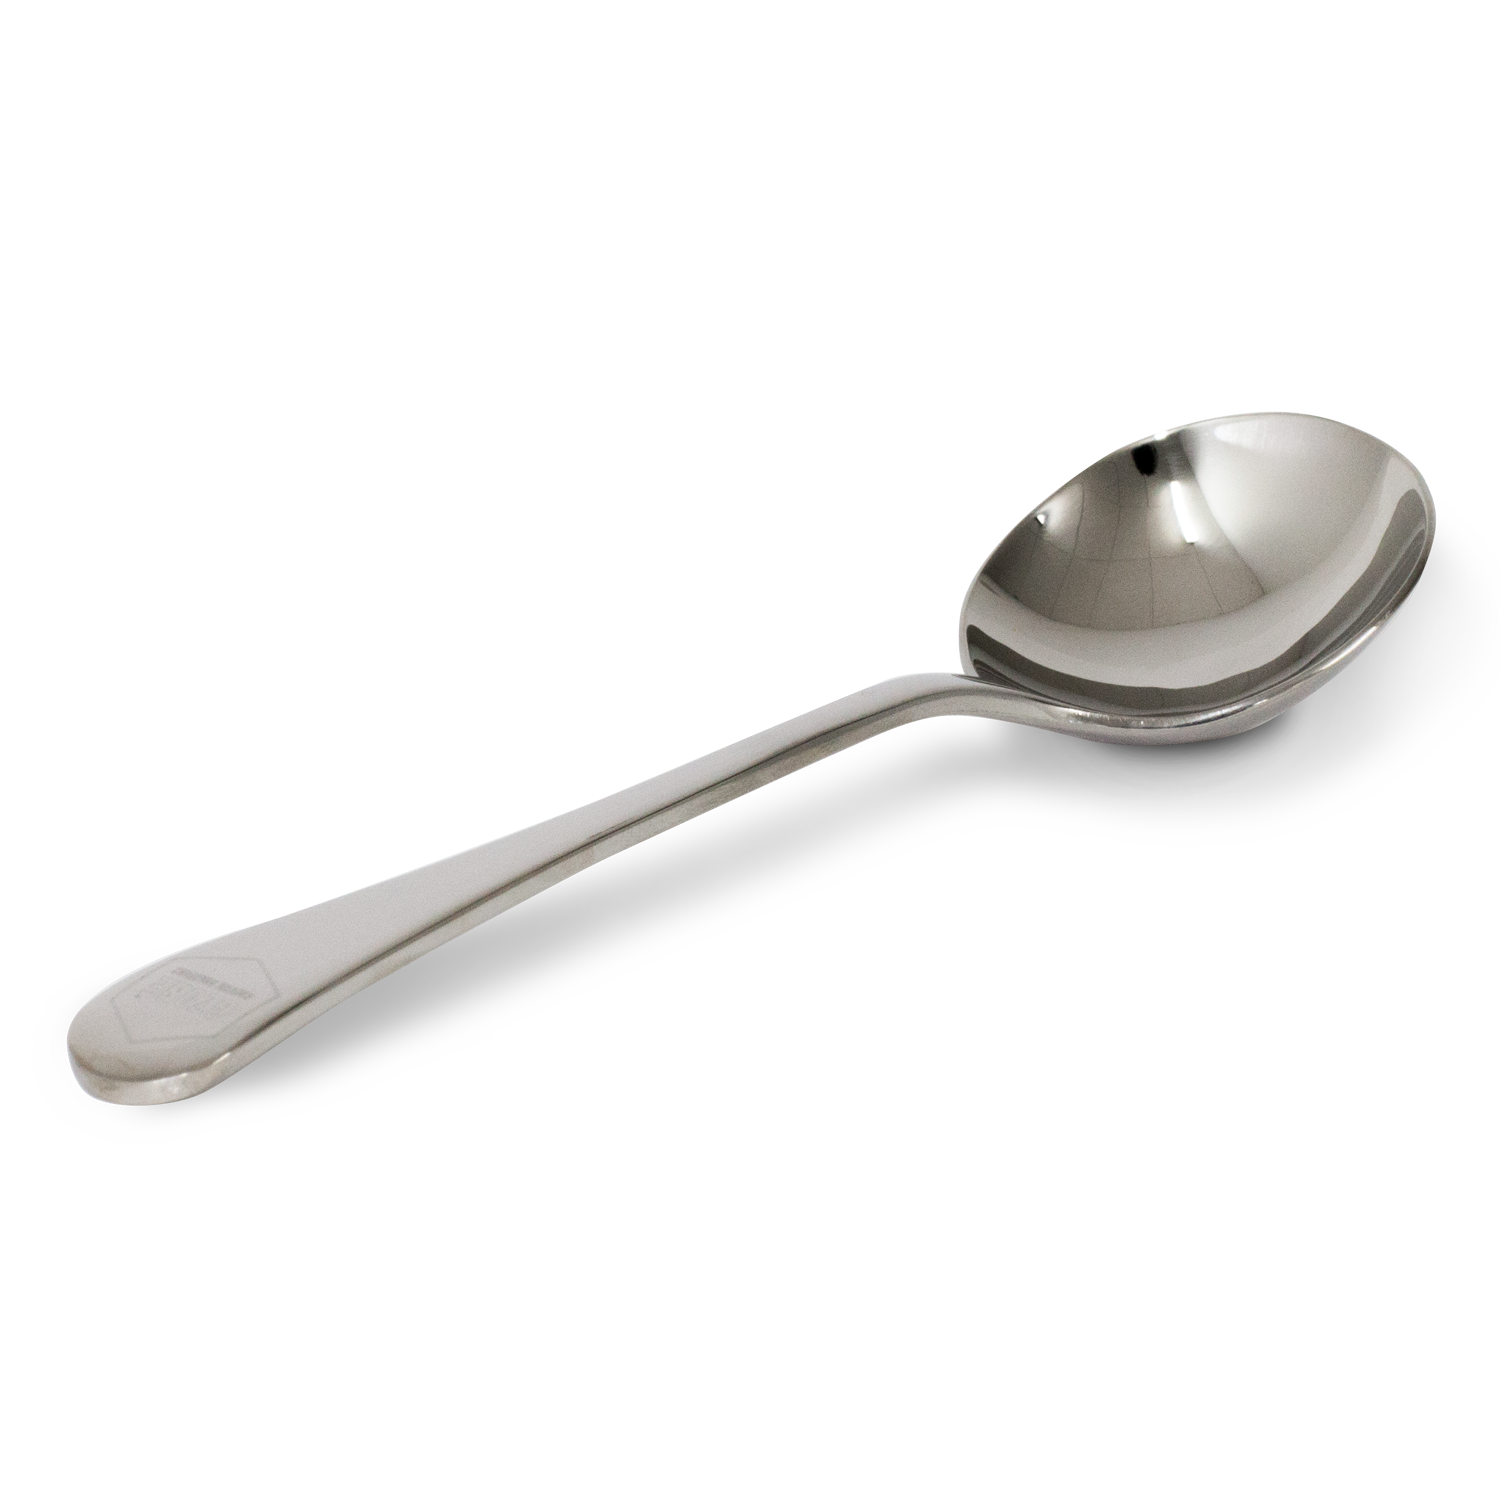 Steel Spoon Clipart PNG Image